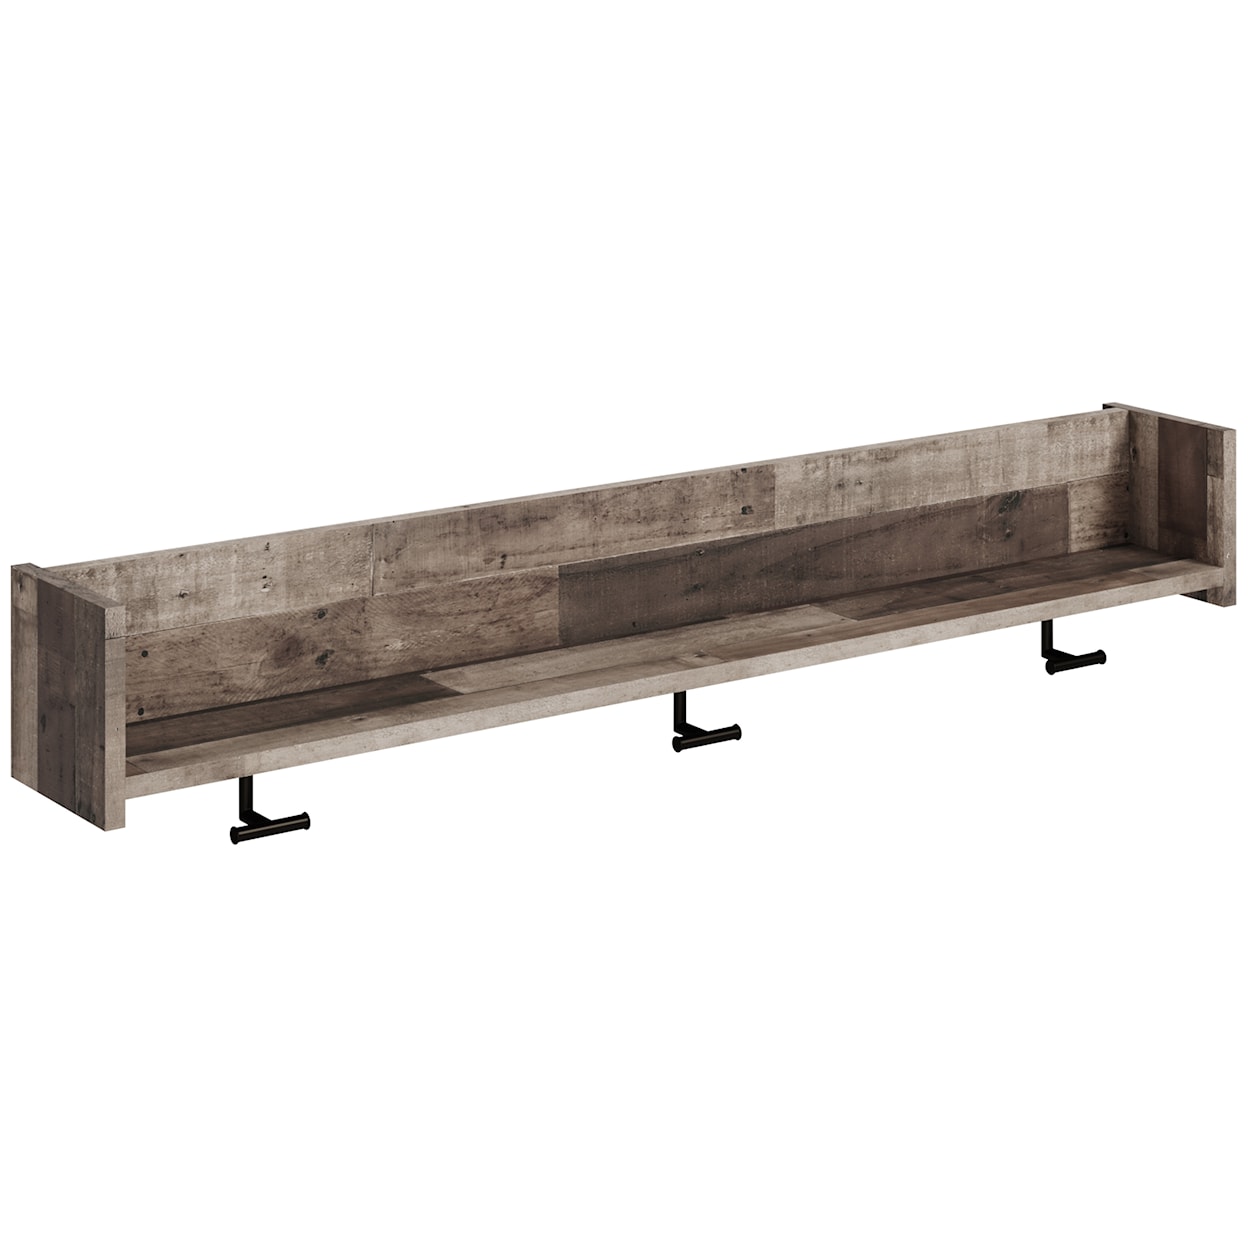 Signature Design by Ashley Furniture Neilsville Wall Mounted Coat Rack with Shelf